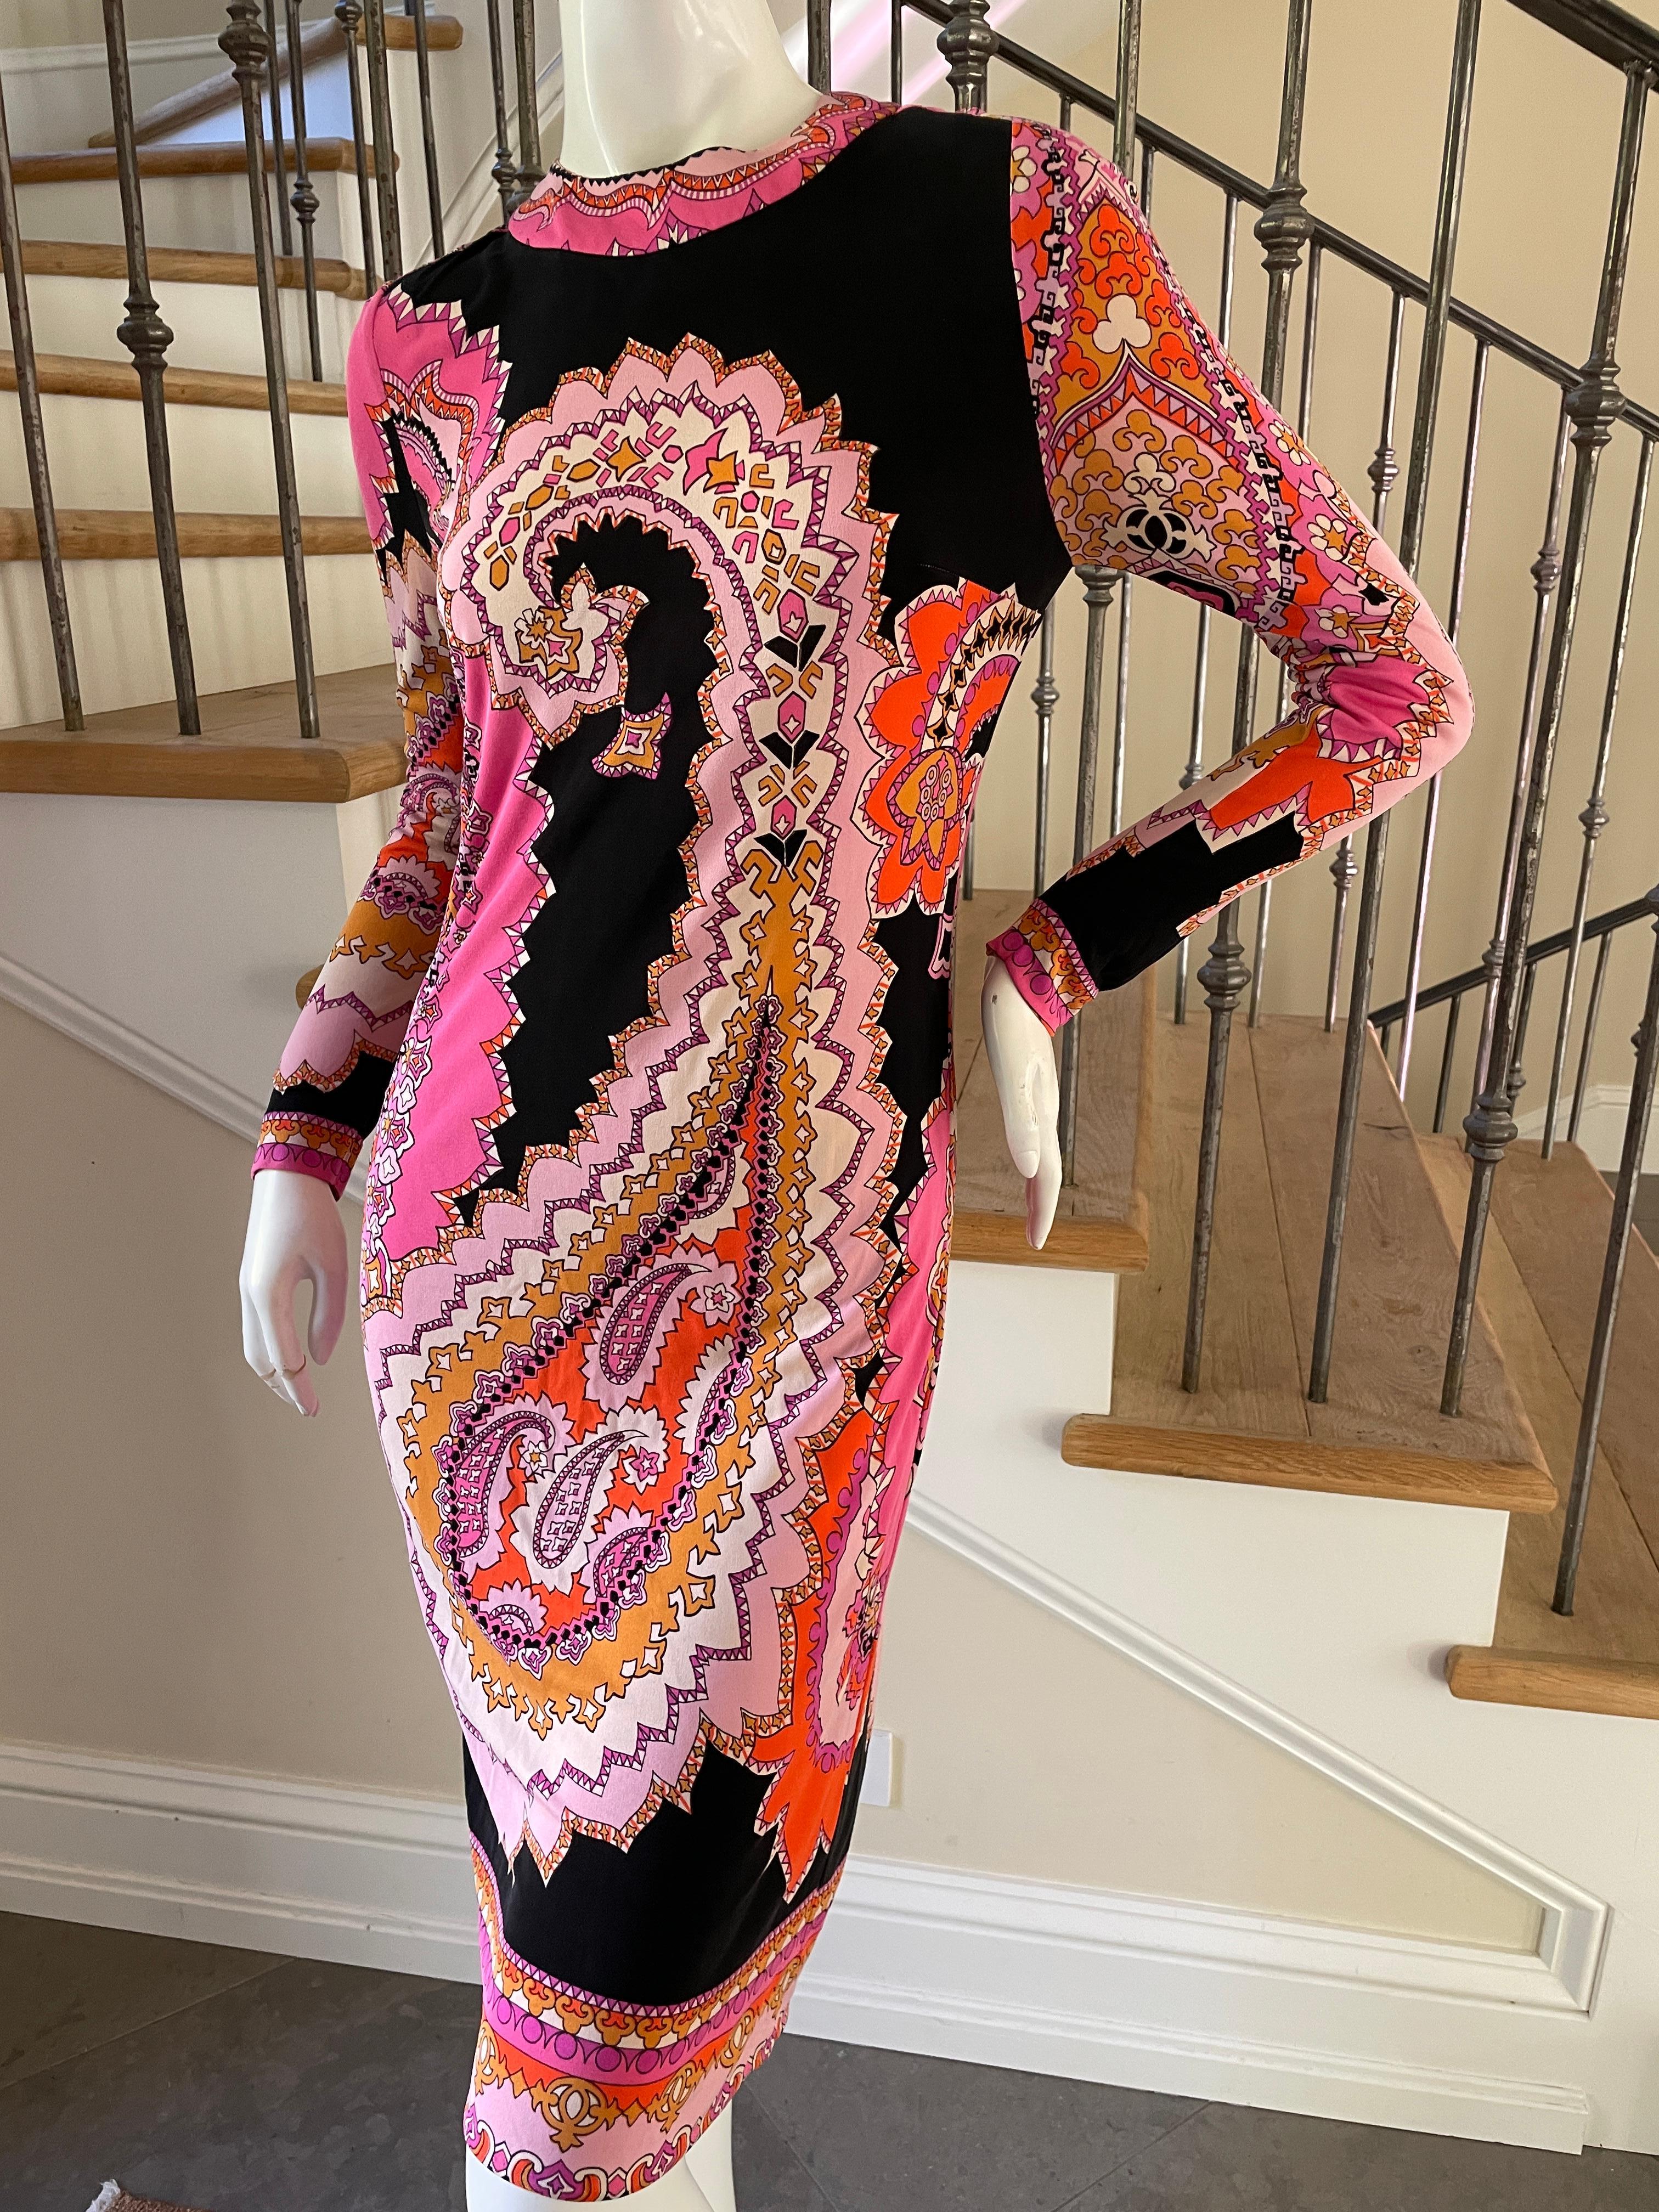 
Leonard Paris Vintage 70's Pink Paisley Print Silk Jersey Dress 
So pretty, please use the zoom lens to see details.

Leonard Paris was a contemporary of Pucci, both houses creating brilliant 60's patterns on silk jersey.
Both were very expensive,